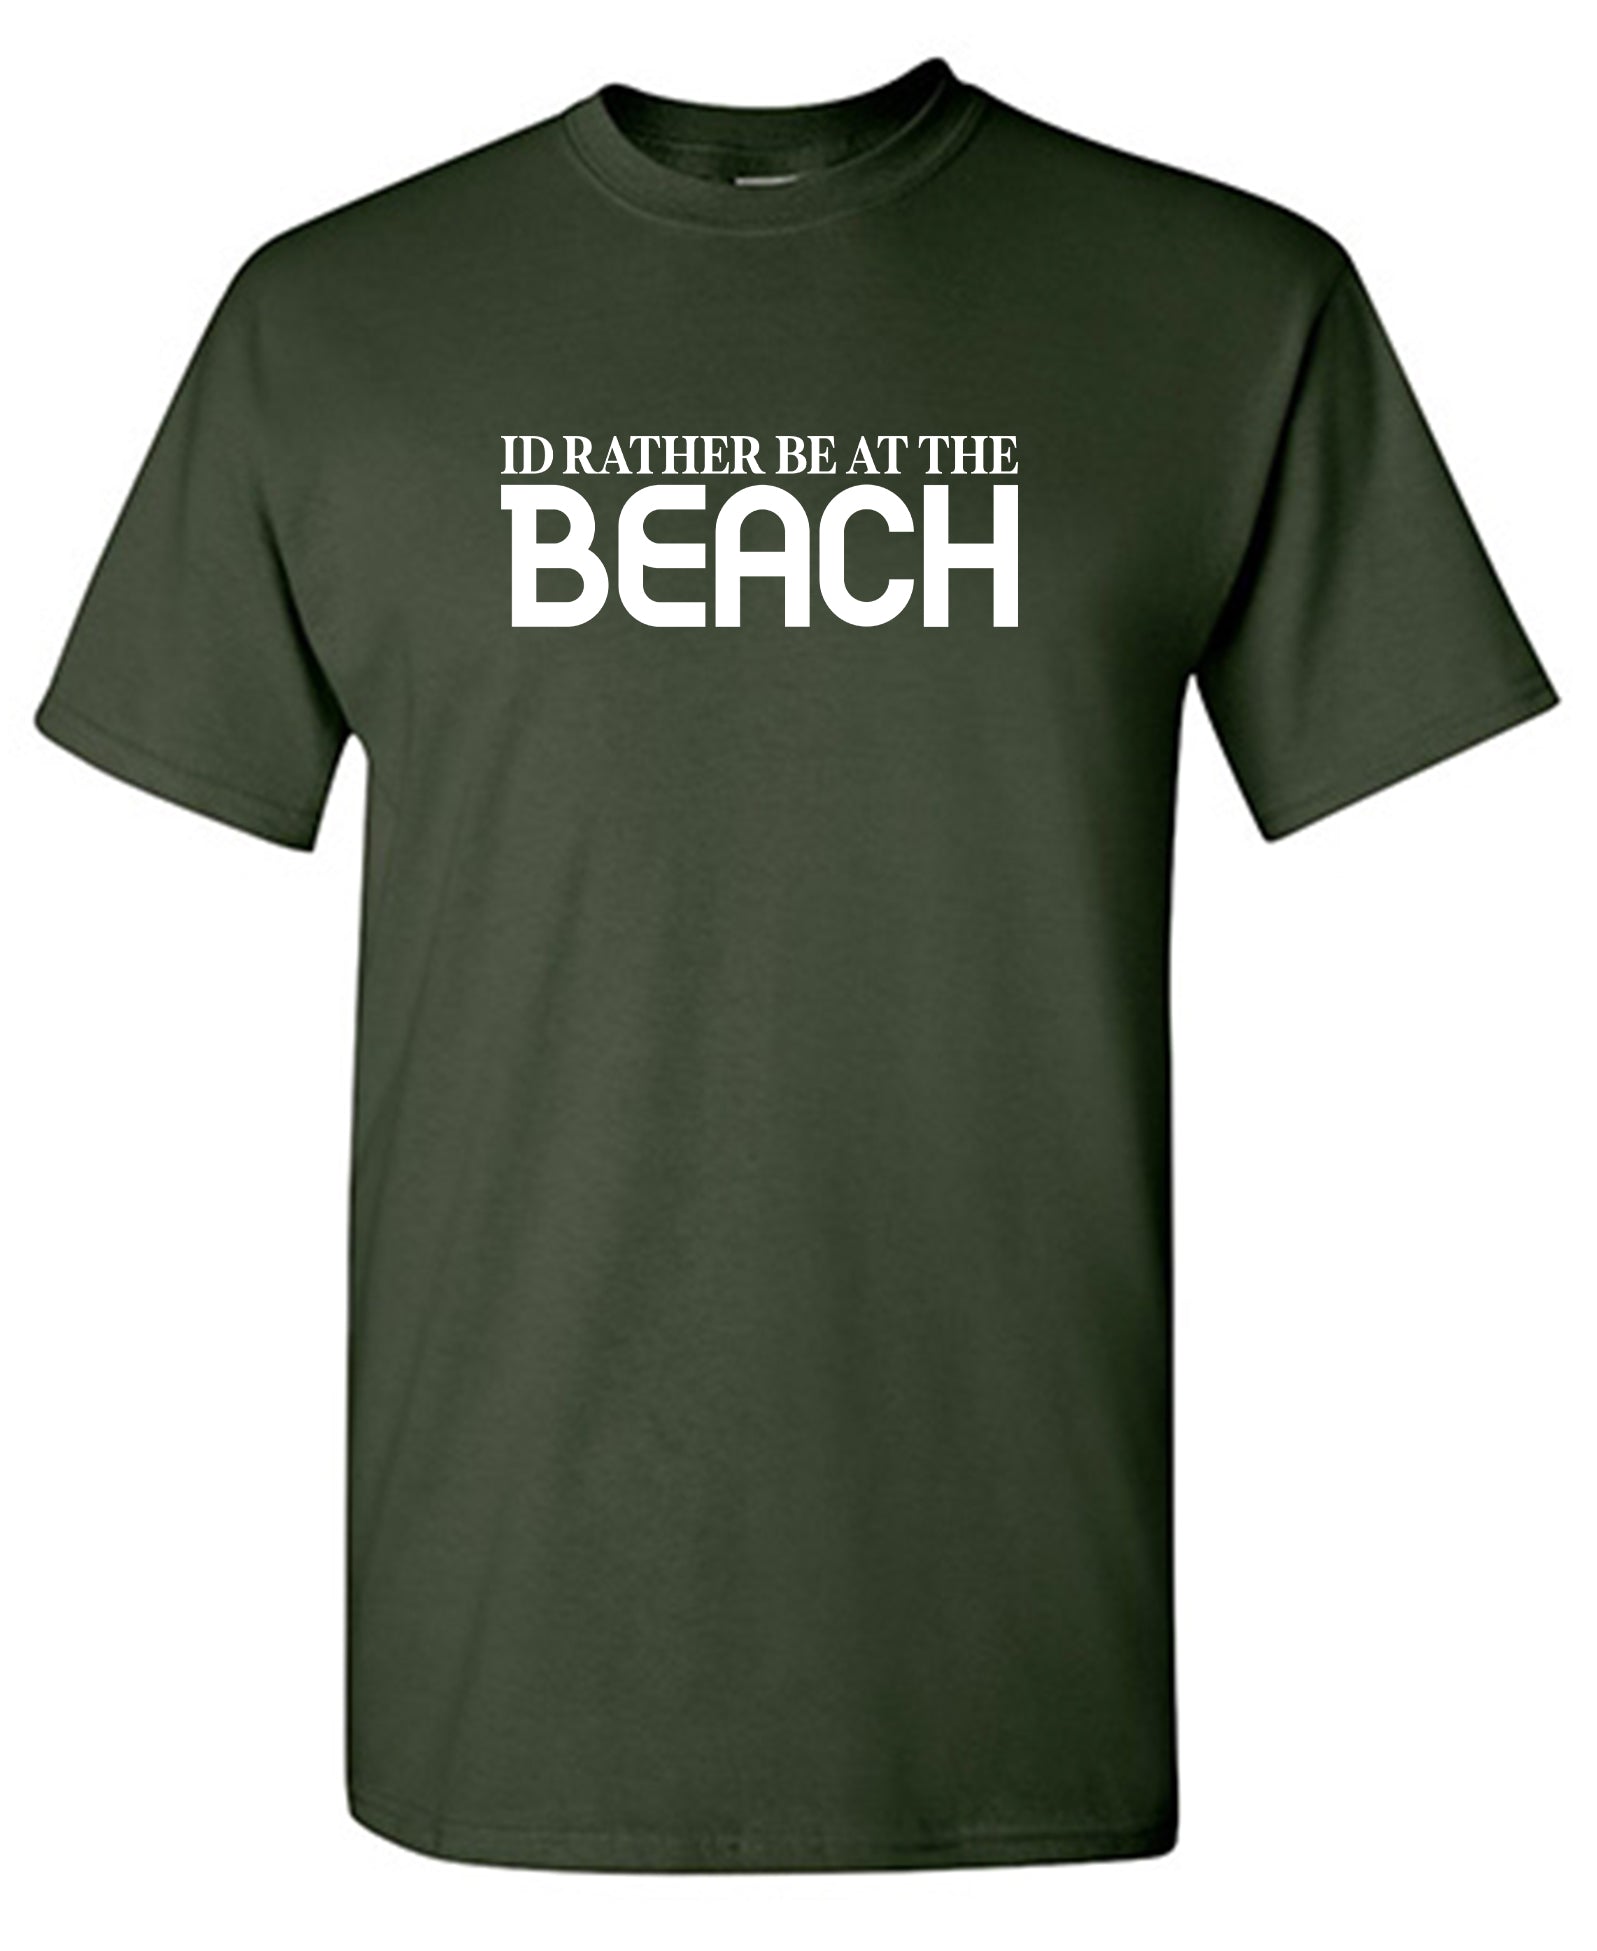 I'd Rather be at The Beach Shirt - Funny T Shirts & Graphic Tees